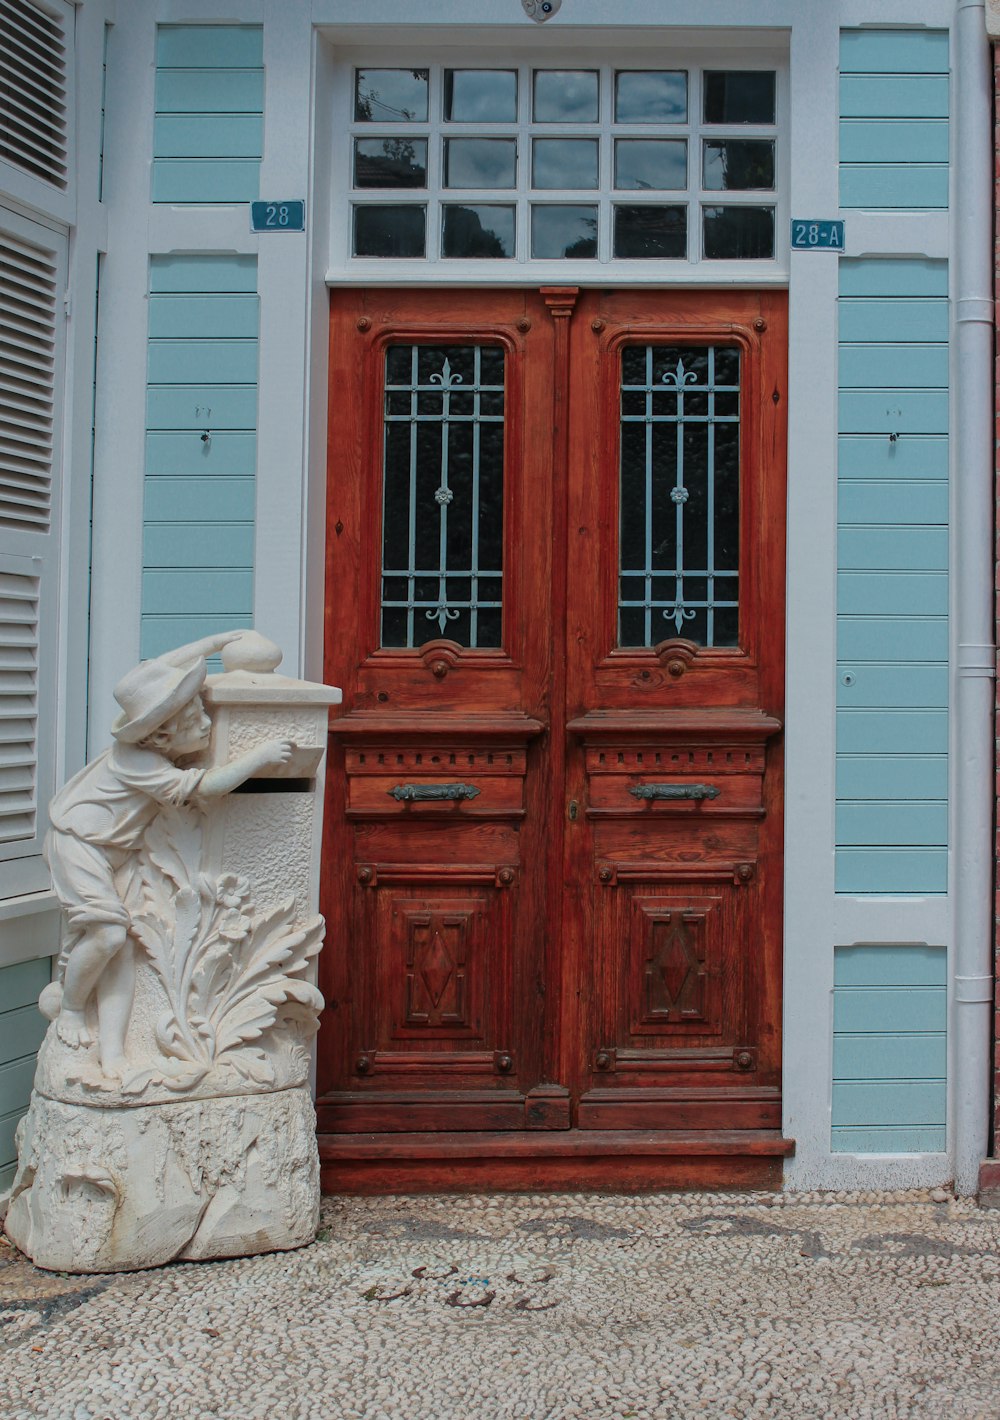 a statue sitting in front of a wooden door